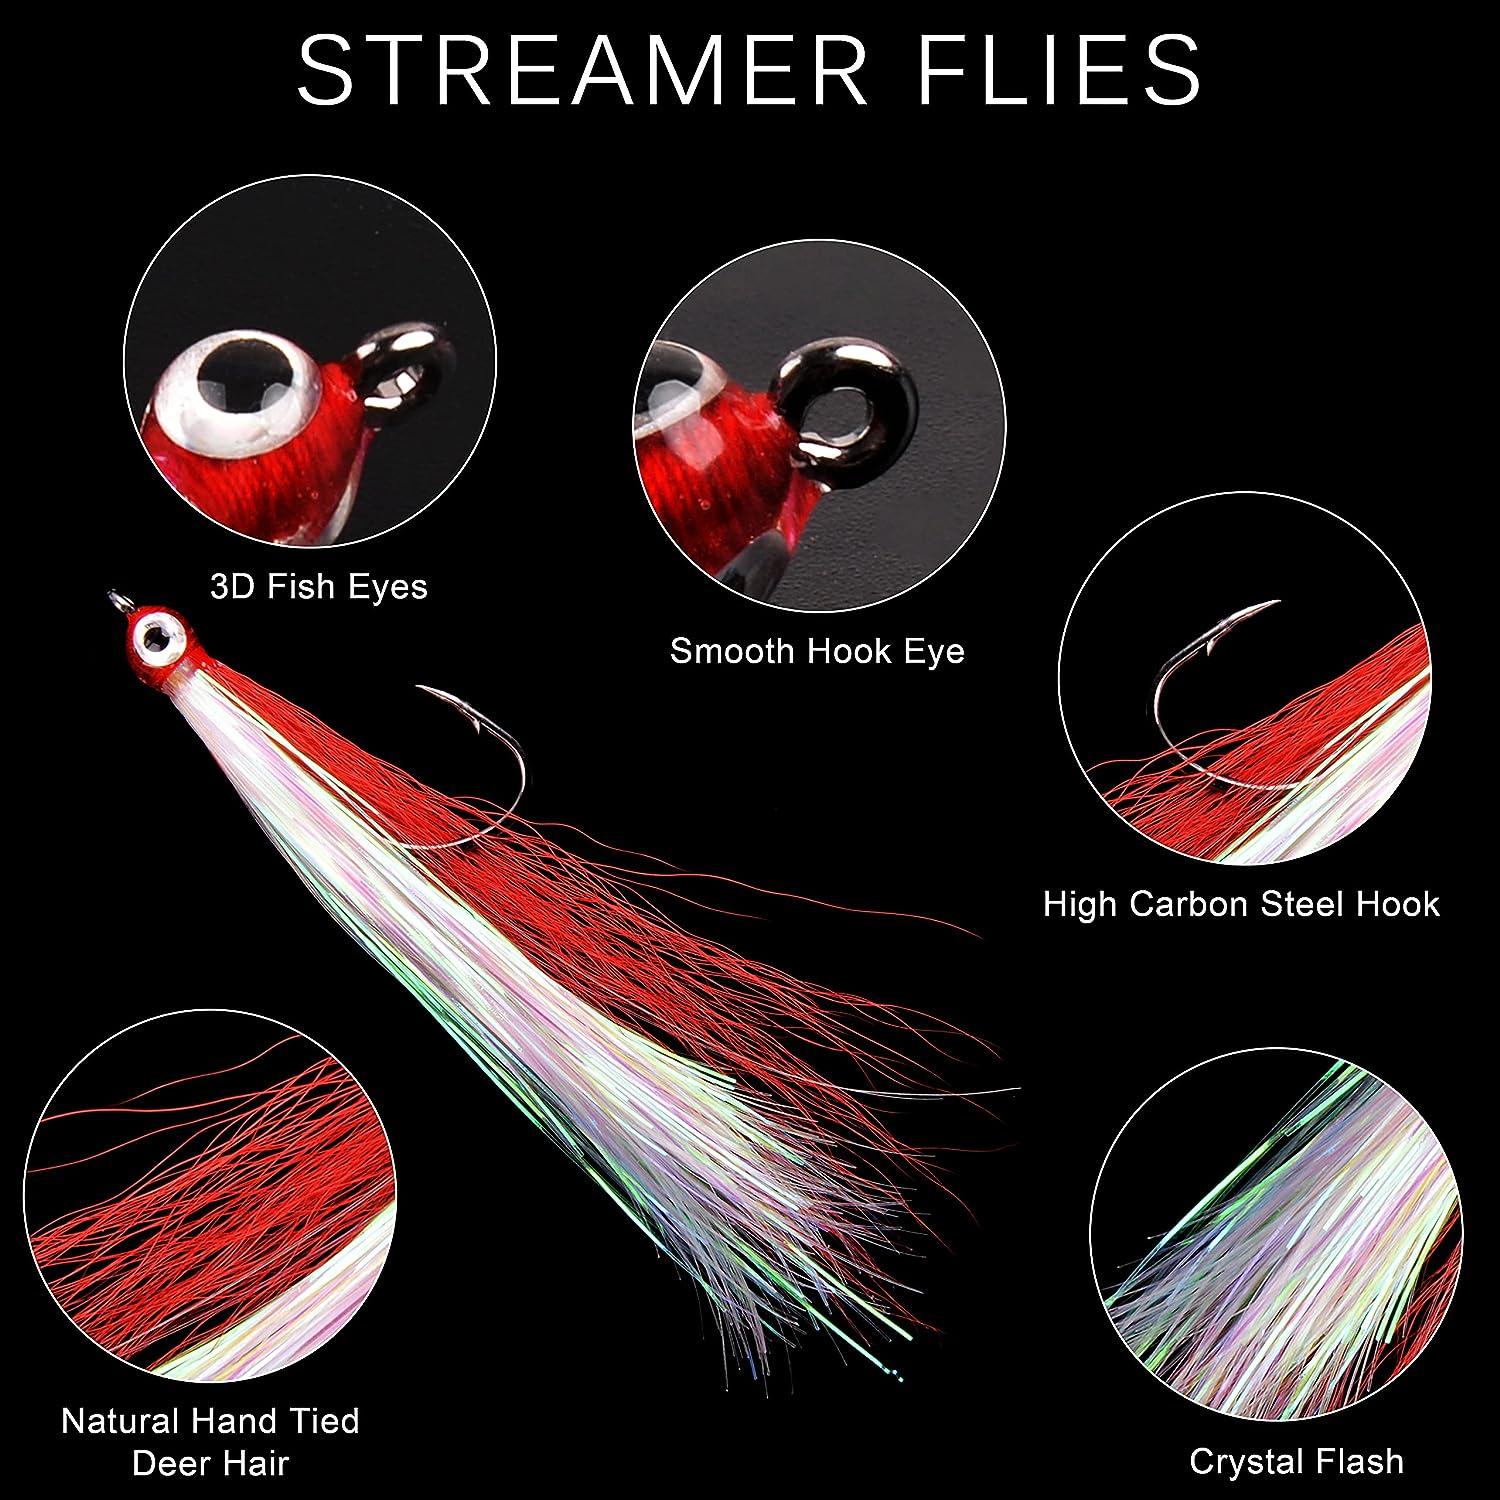 Streamer Flies for Fly Fishing, Classic Clouser Minnow Fishing Flies  Streamers Fly Fishing Lures for Trout Bass Saltwater Freshwater Red 5pcs